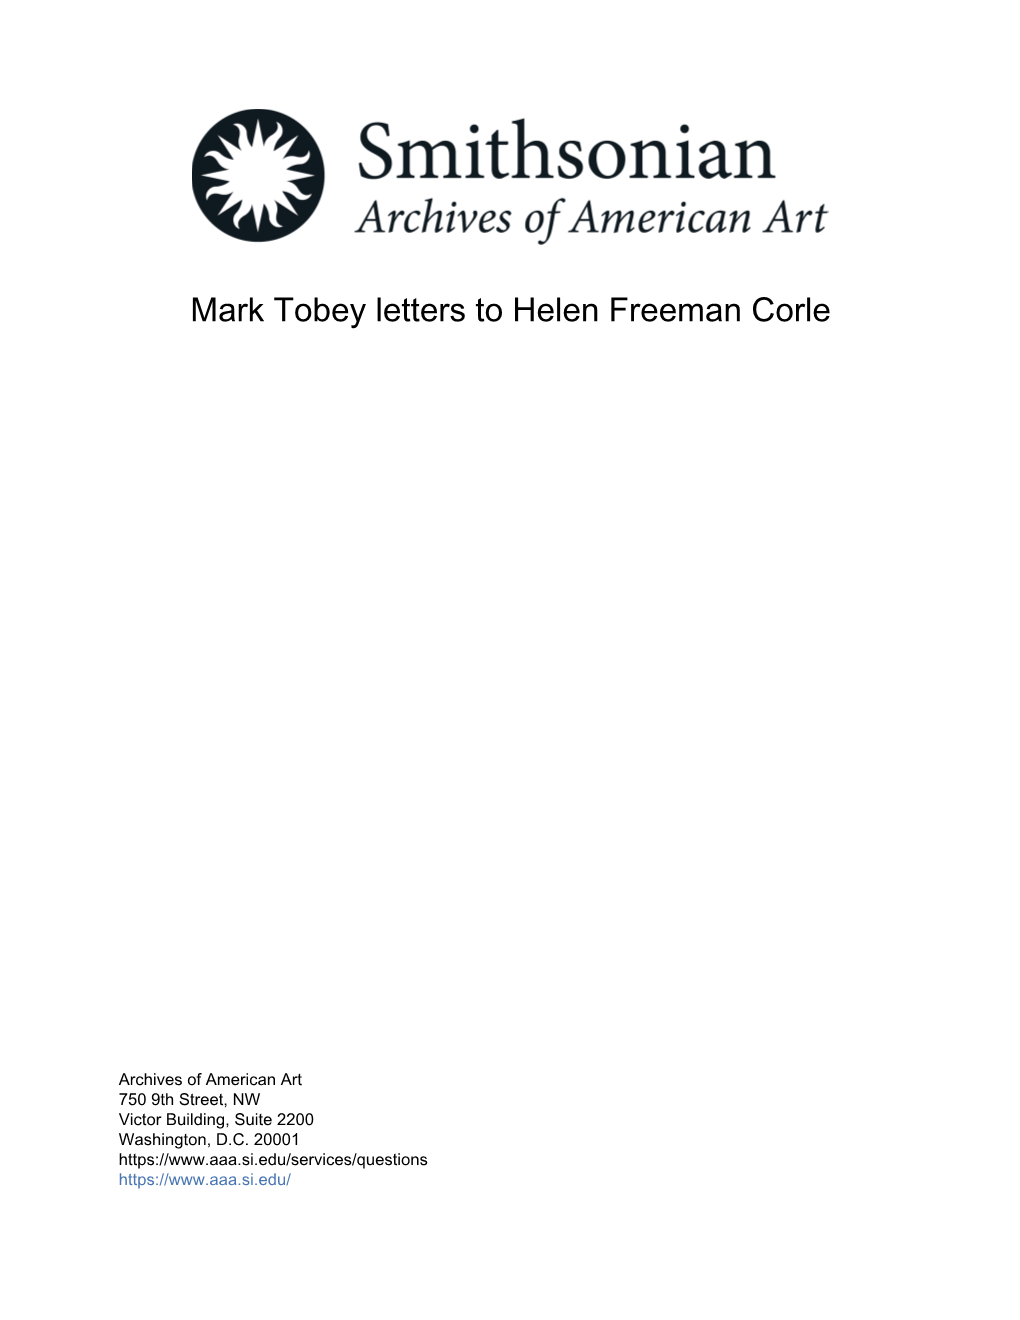 Mark Tobey Letters to Helen Freeman Corle